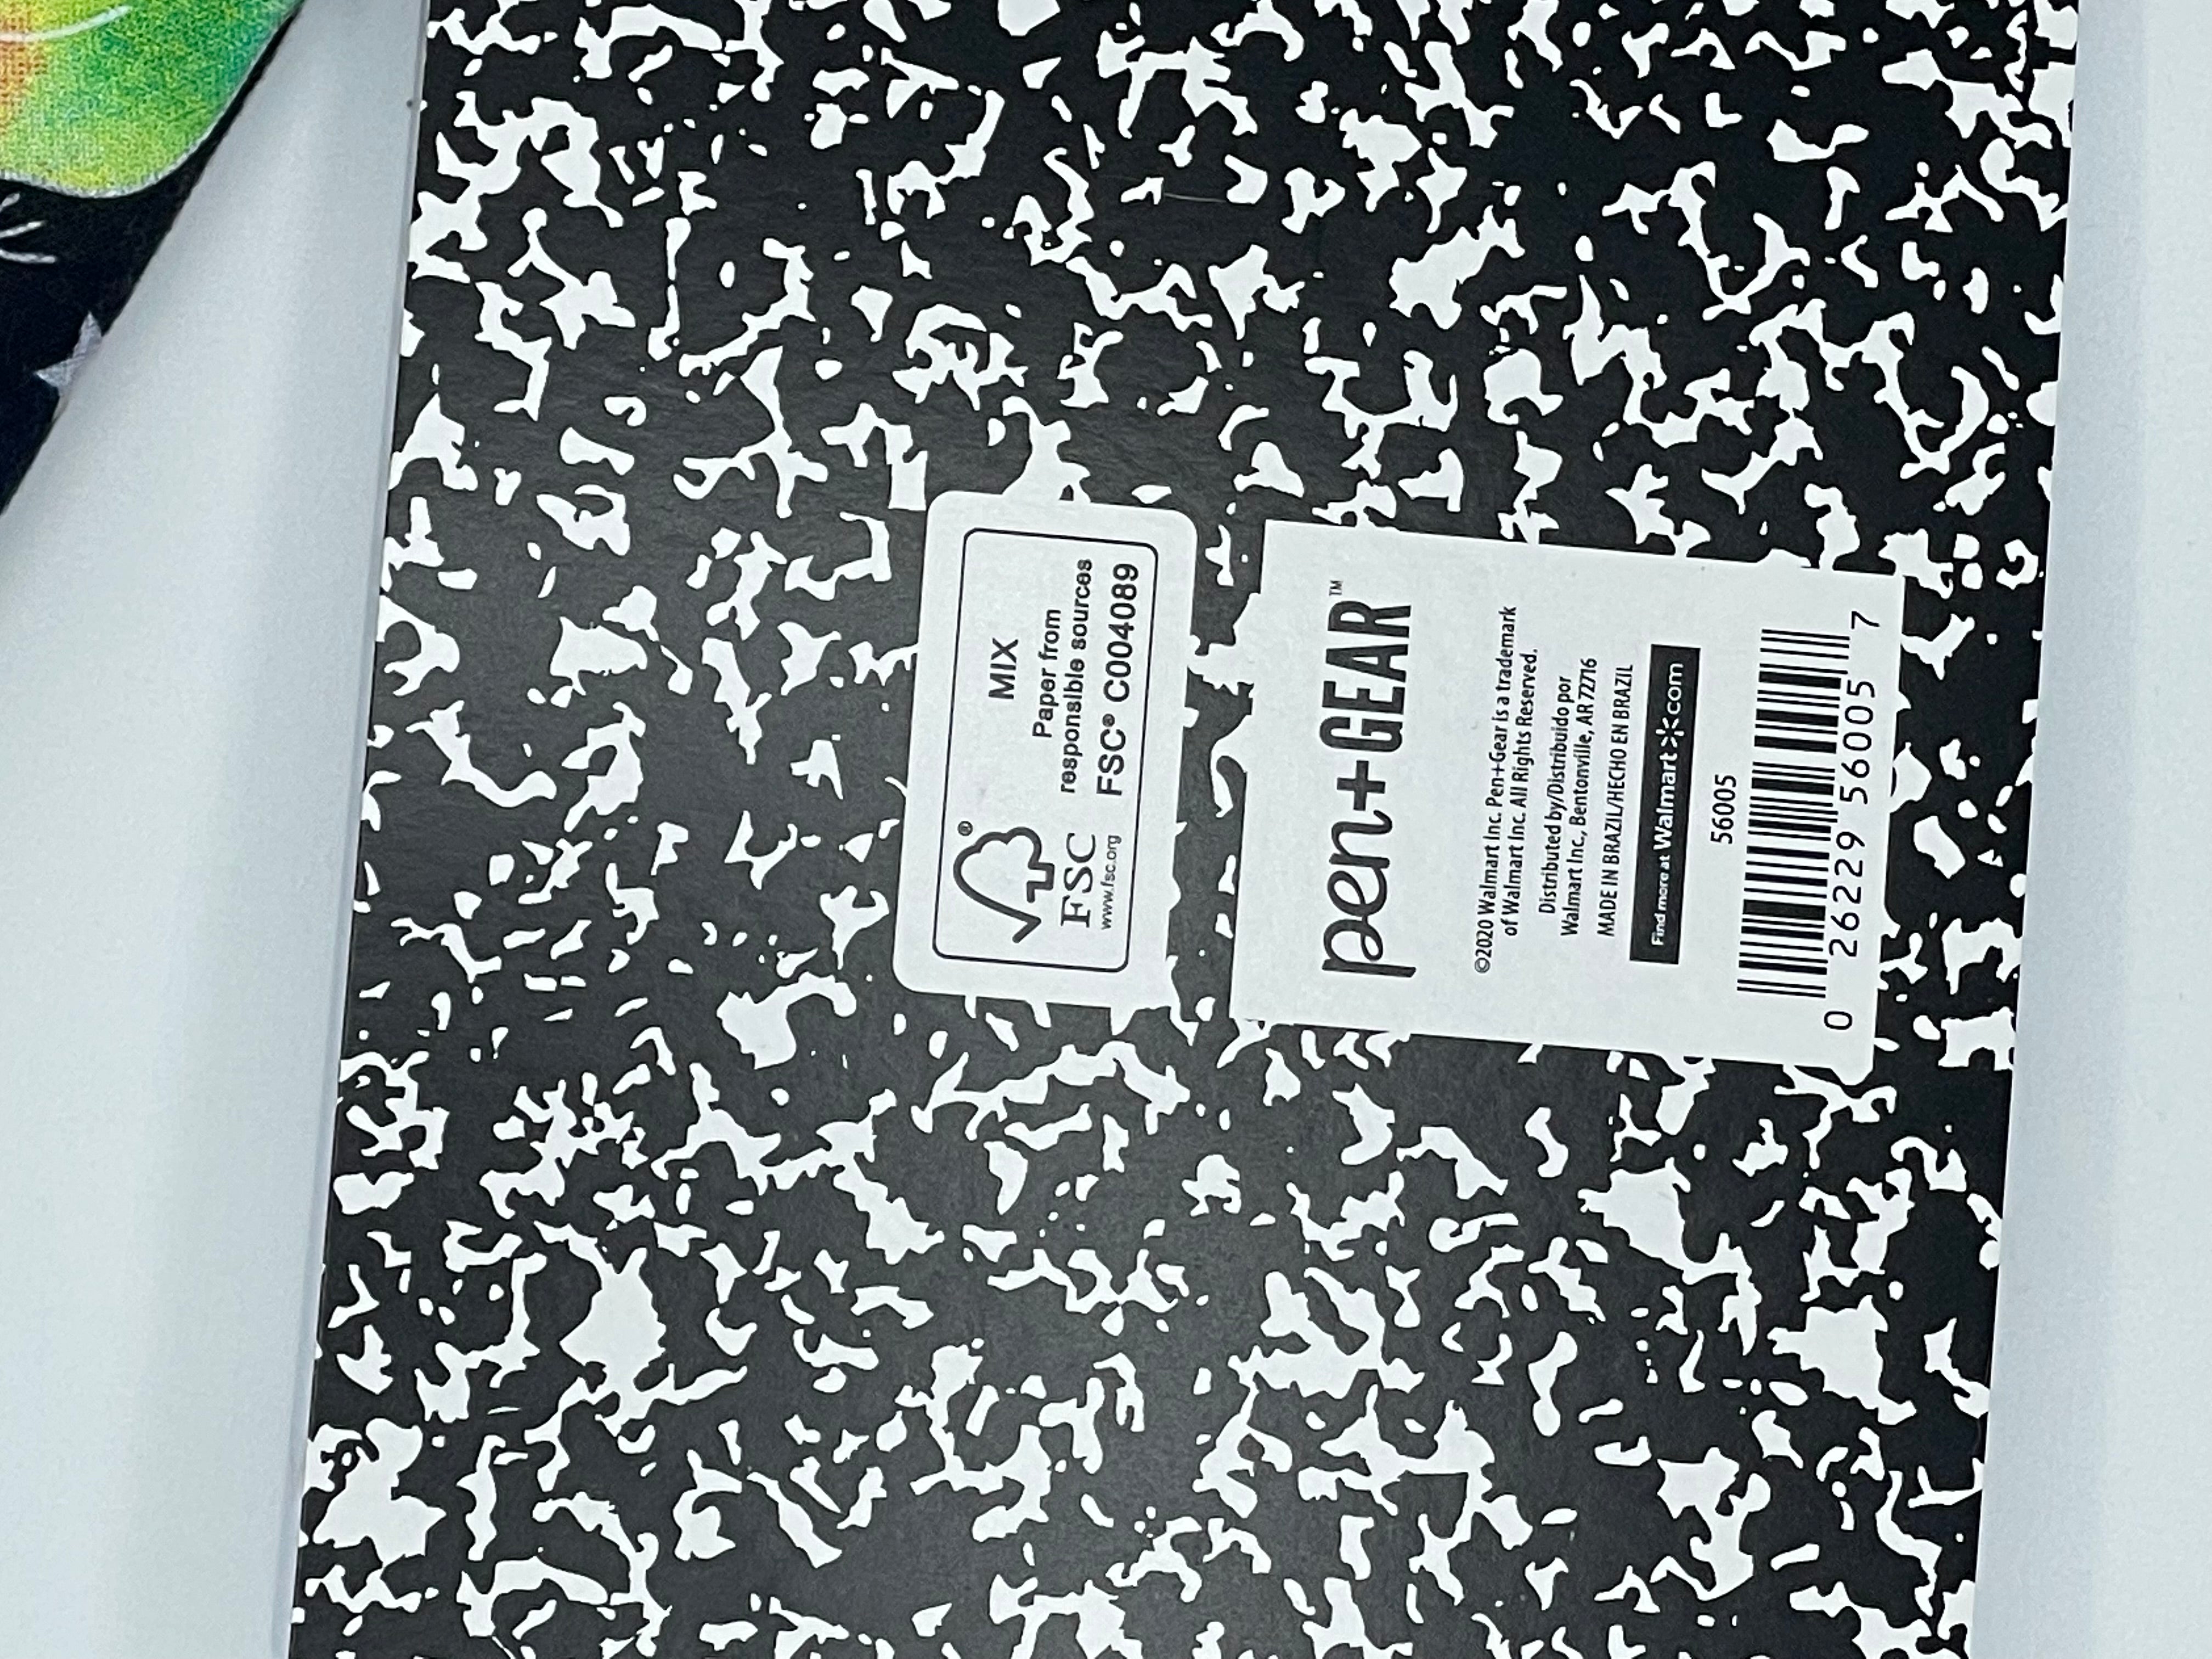 Half Composition Notebook Fabric Cover